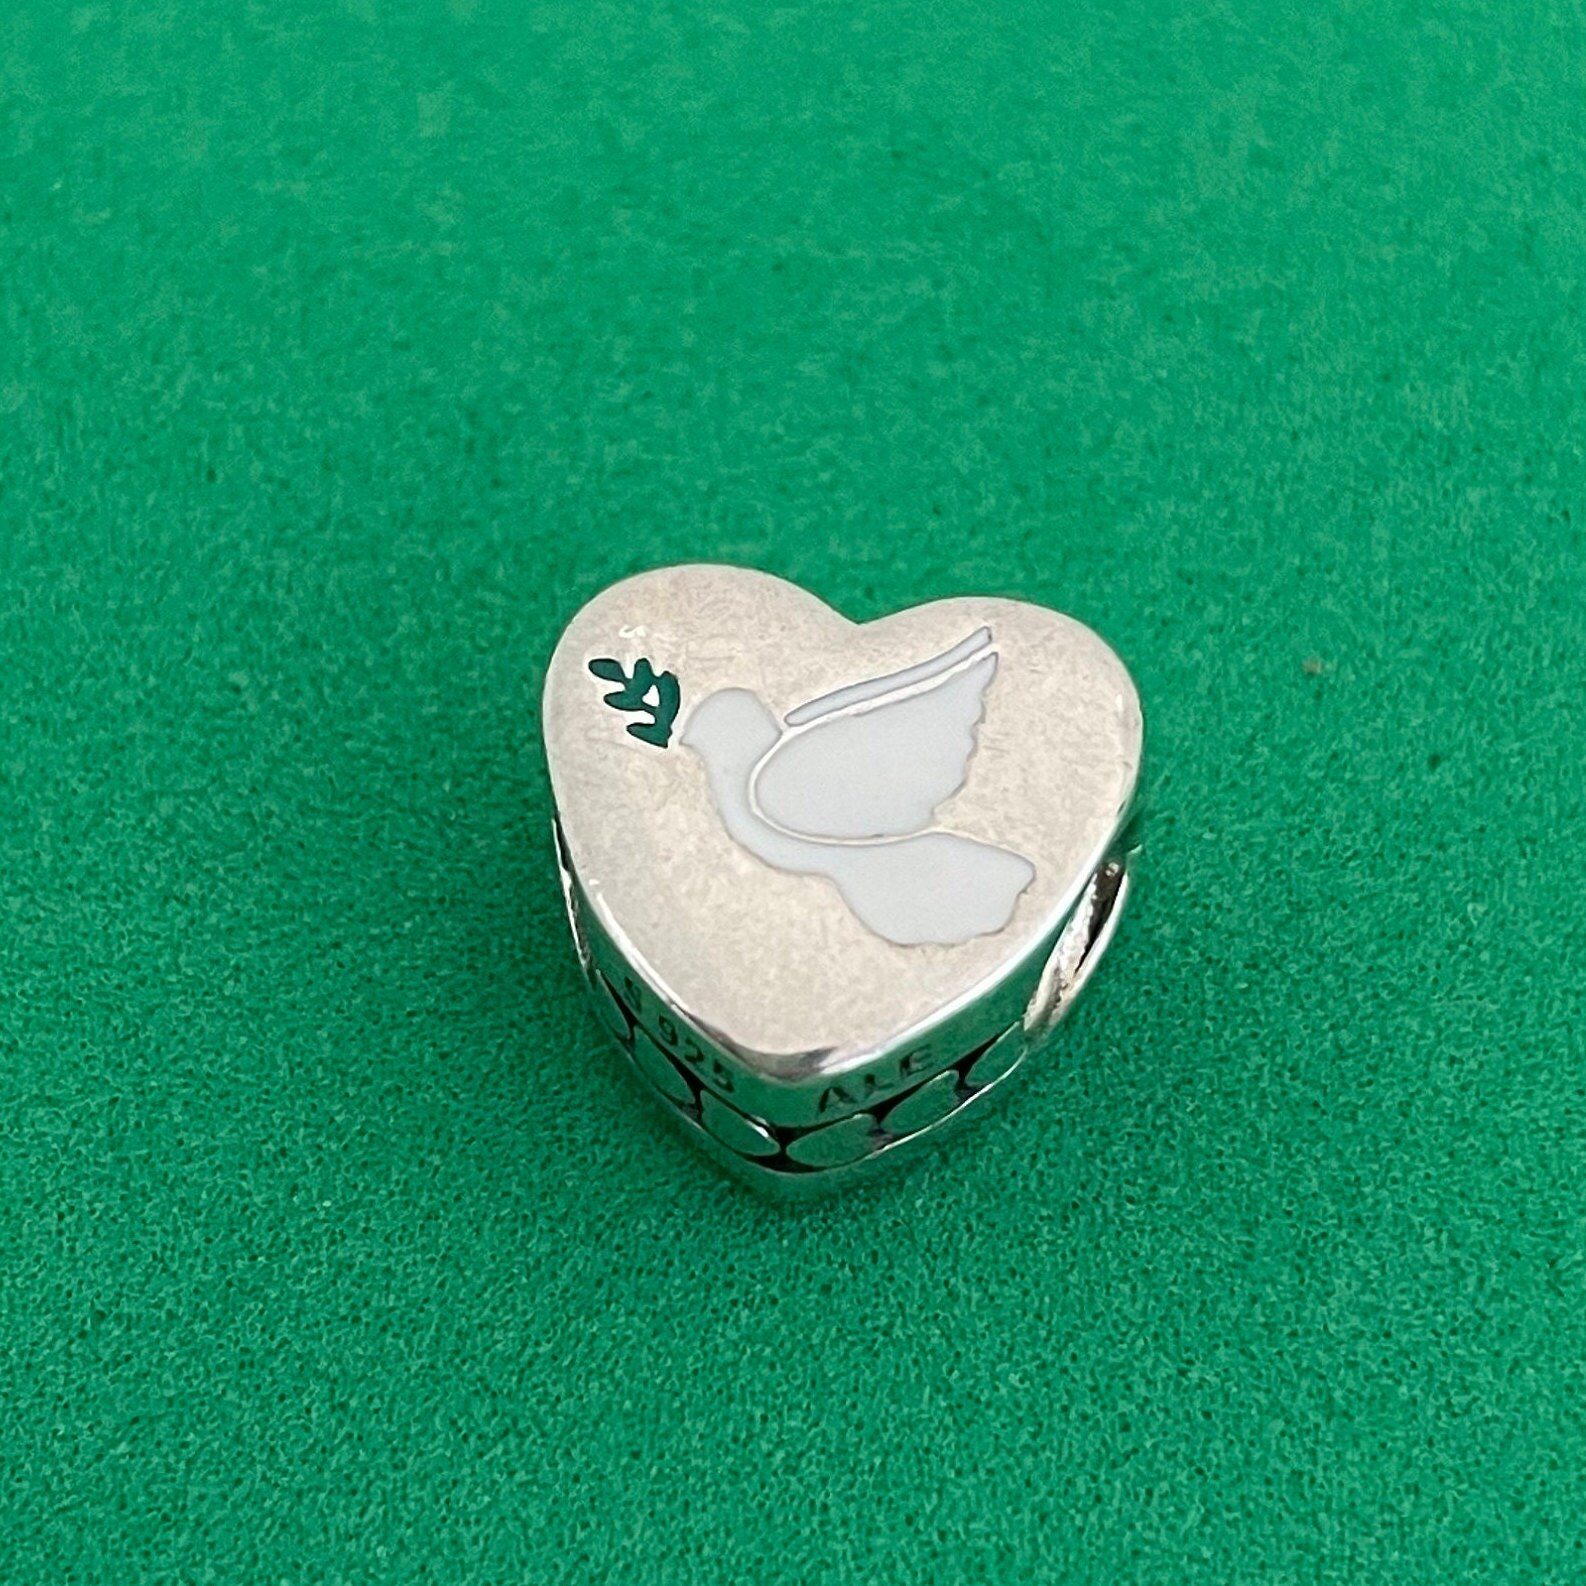 NEW, Original Packaging Pandora Cleaning Kit, With Silver Plated, Pandora  Engraved Heart Keychain, It's a Nice Jewelery Box 